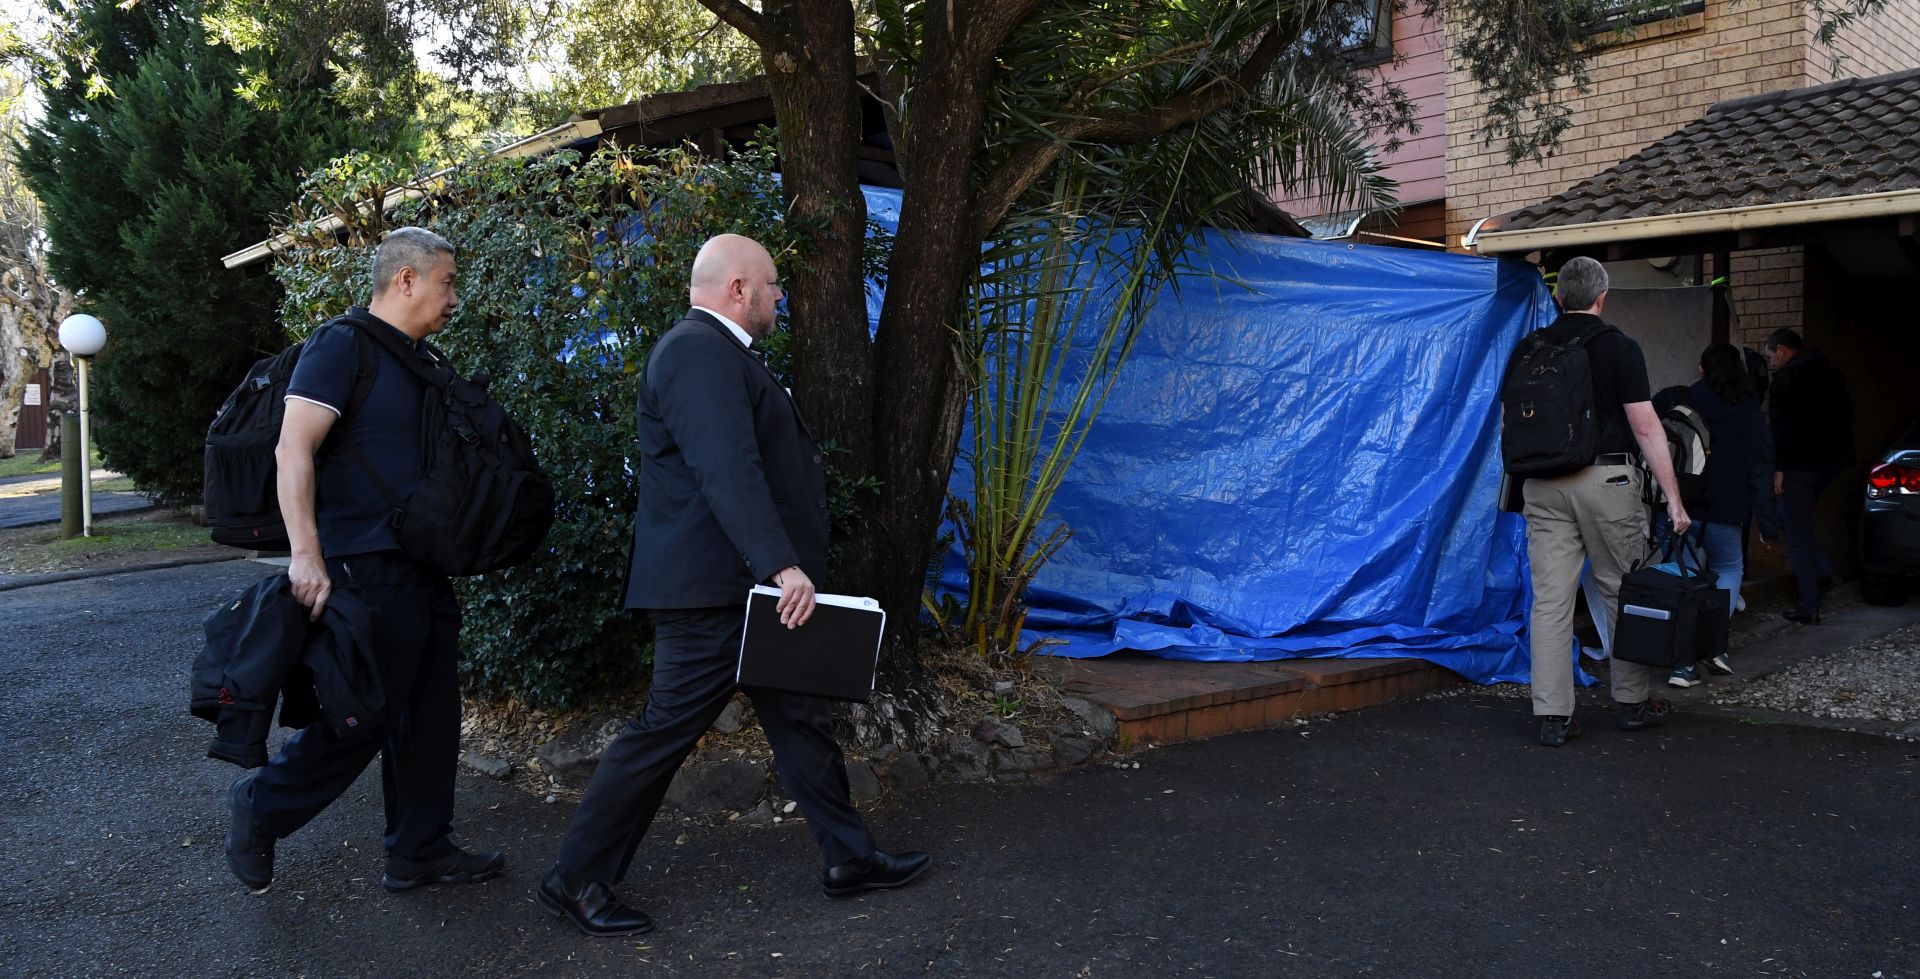 epa07688691 New South Wales Police raid a home in Greenacre, Sydney, Australia, 02 June 2019. Three Sydney men have been arrested over an alleged Islamic State-inspired plot to attack a variety of targets in Australia including embassies and court buildings.  EPA/JOEL CARRETT NO ARCHIVING AUSTRALIA AND NEW ZEALAND OUT